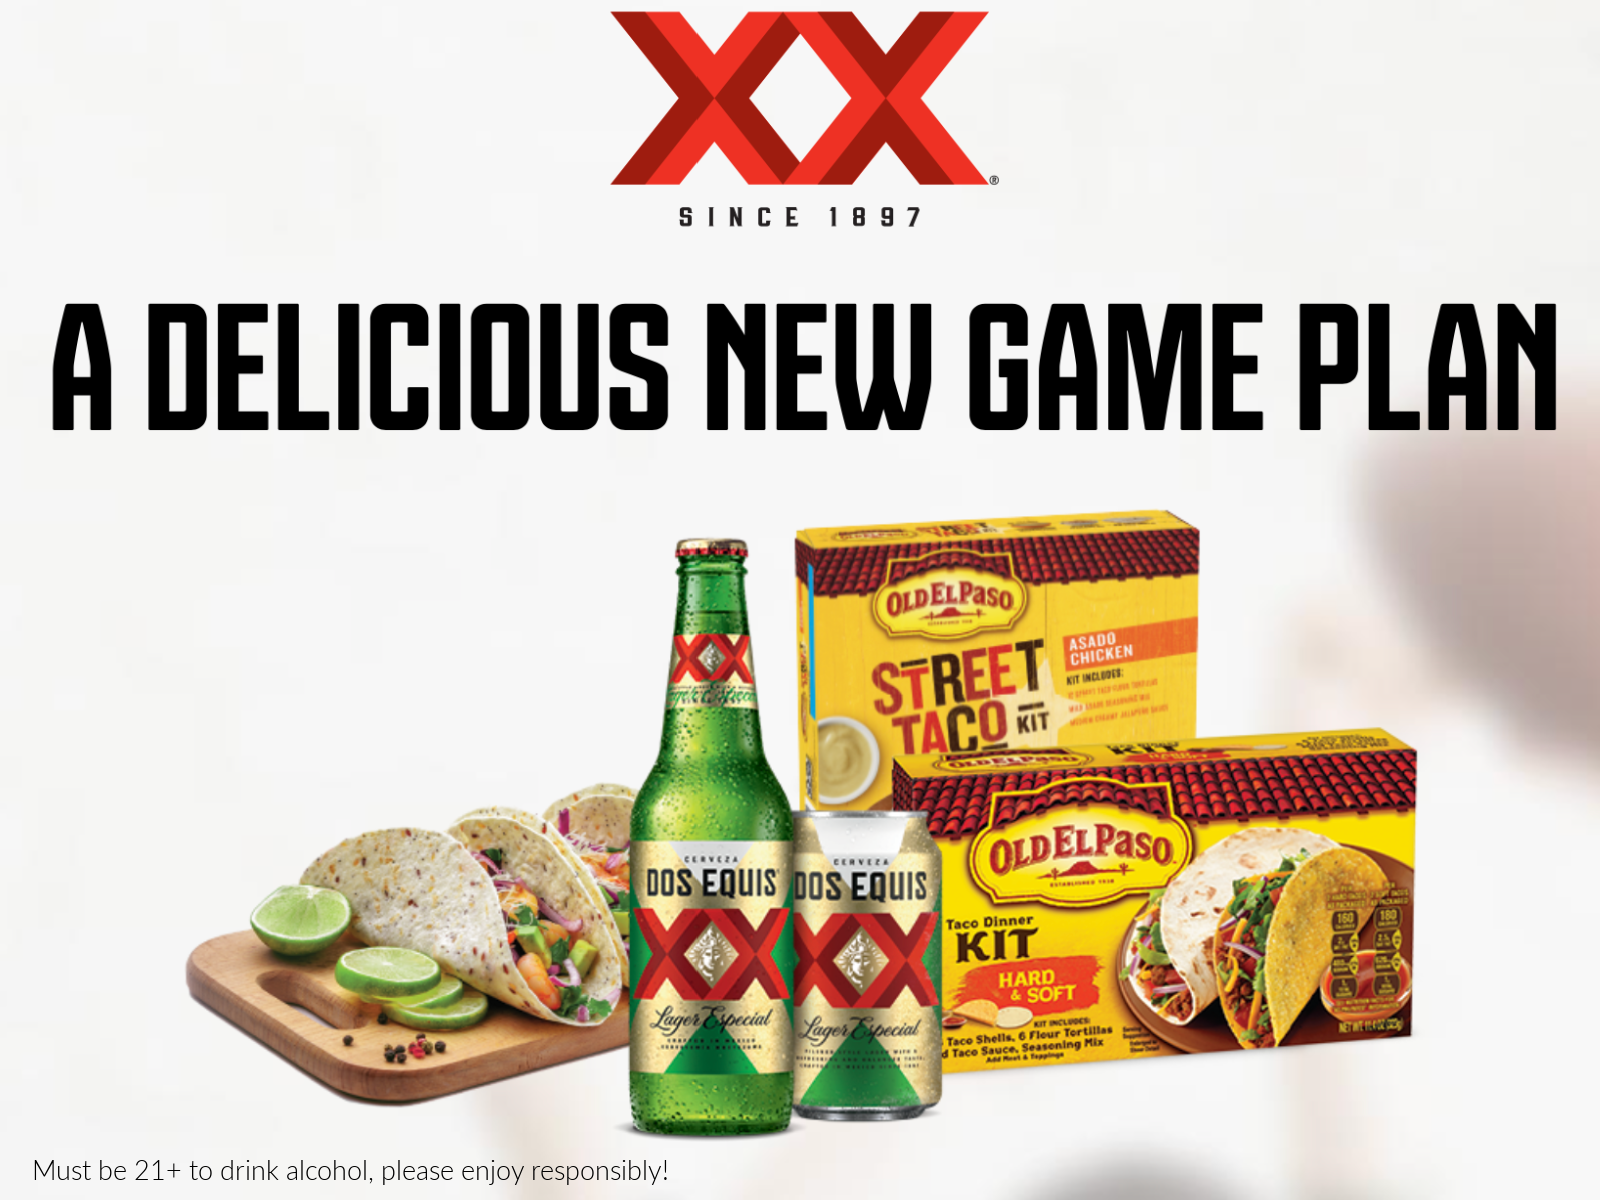 Enter To Win Tickets Any Pro Football Game Next Season In The Dos Equis & Old El Paso Sweepstakes ($100 Gift Card Prizes Too!) on I Heart Publix